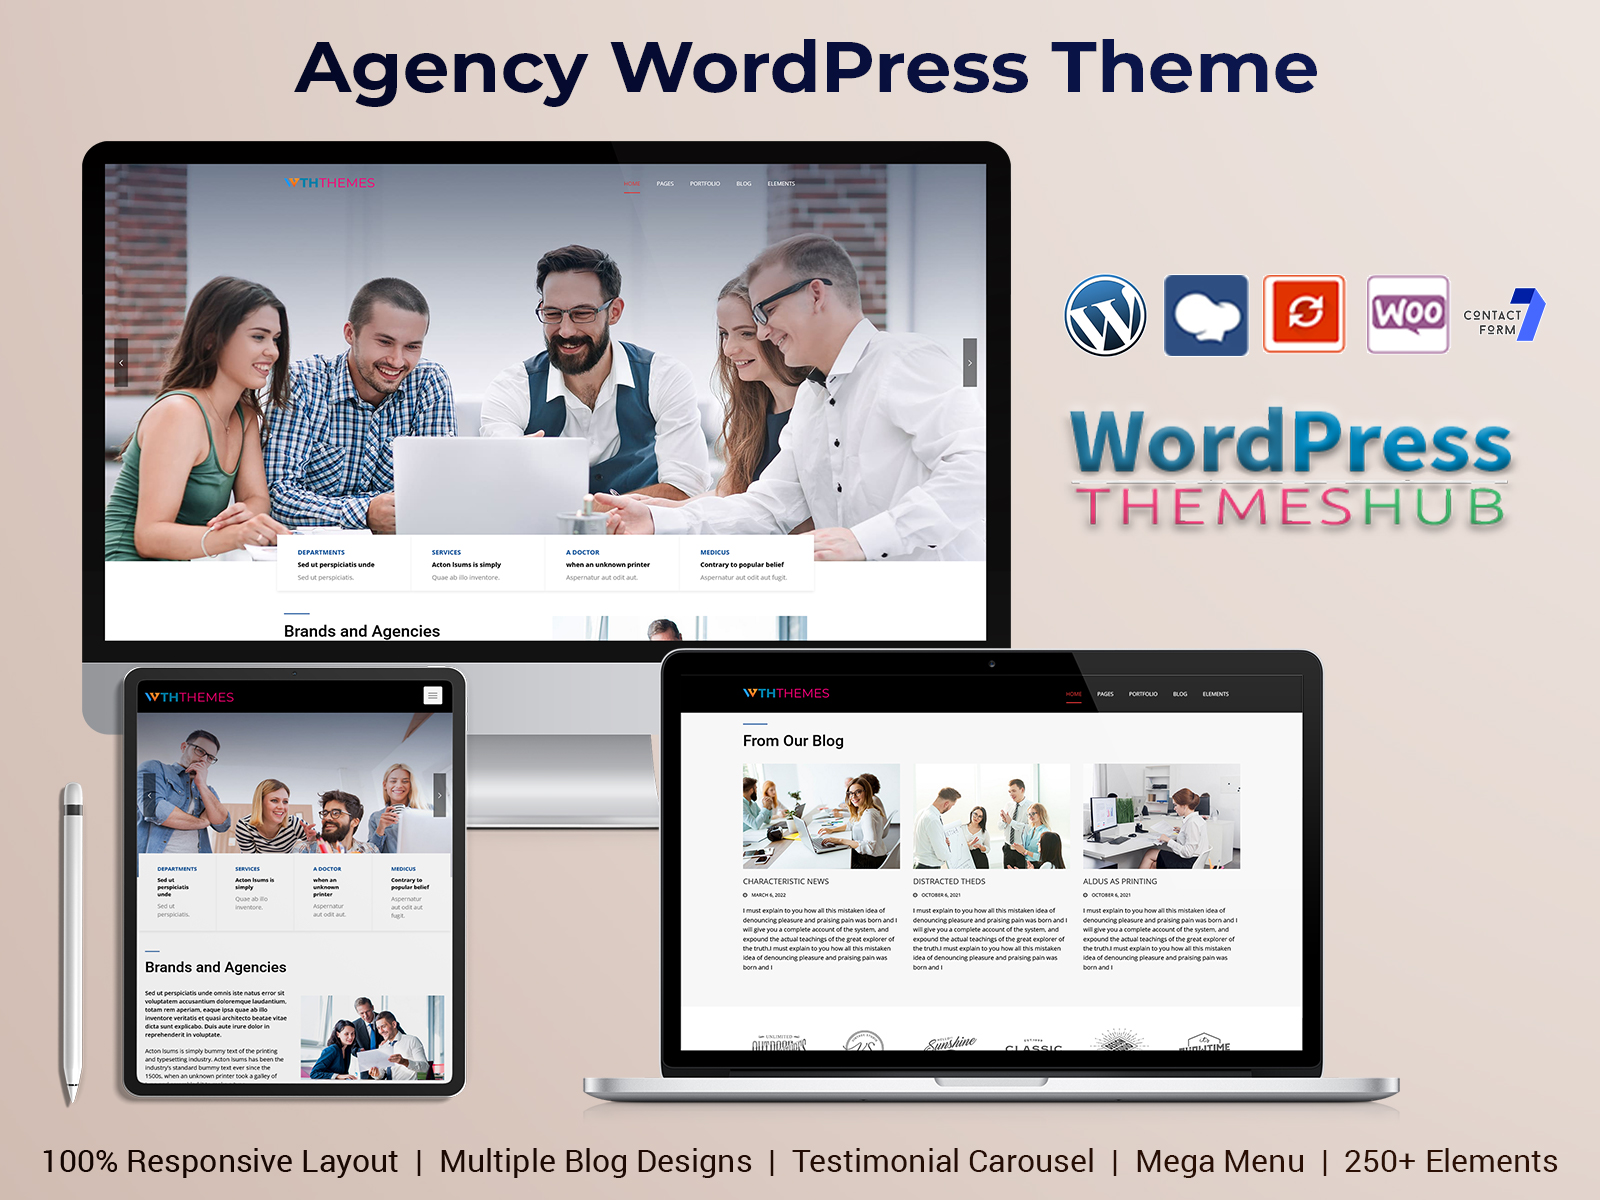 Agency WordPress Theme To Create An Elegant Website For Your Agency